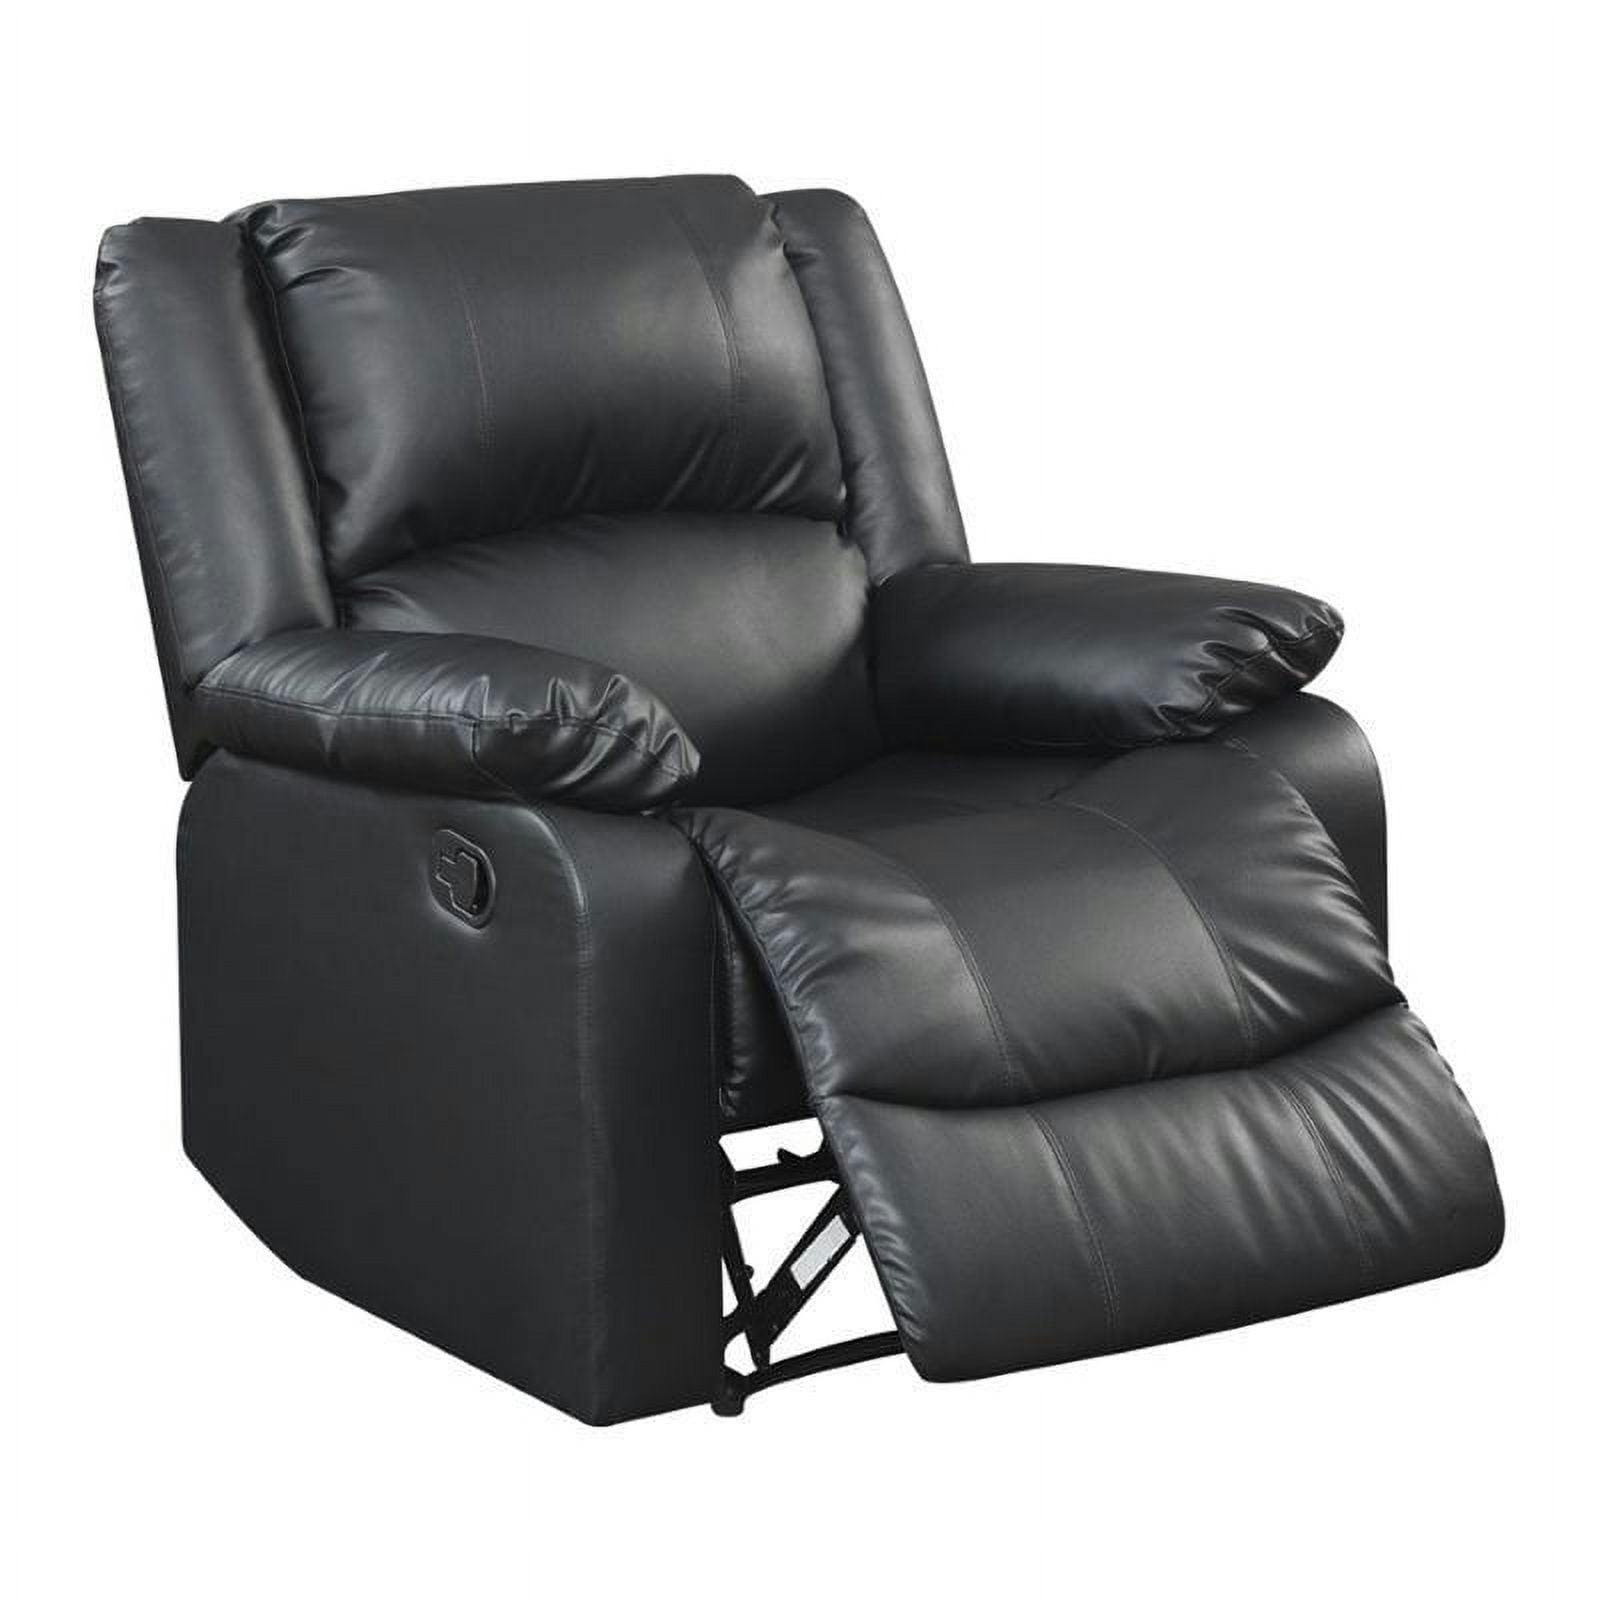 Pittsburg Black Faux Leather Manual Recliner with Wood Frame